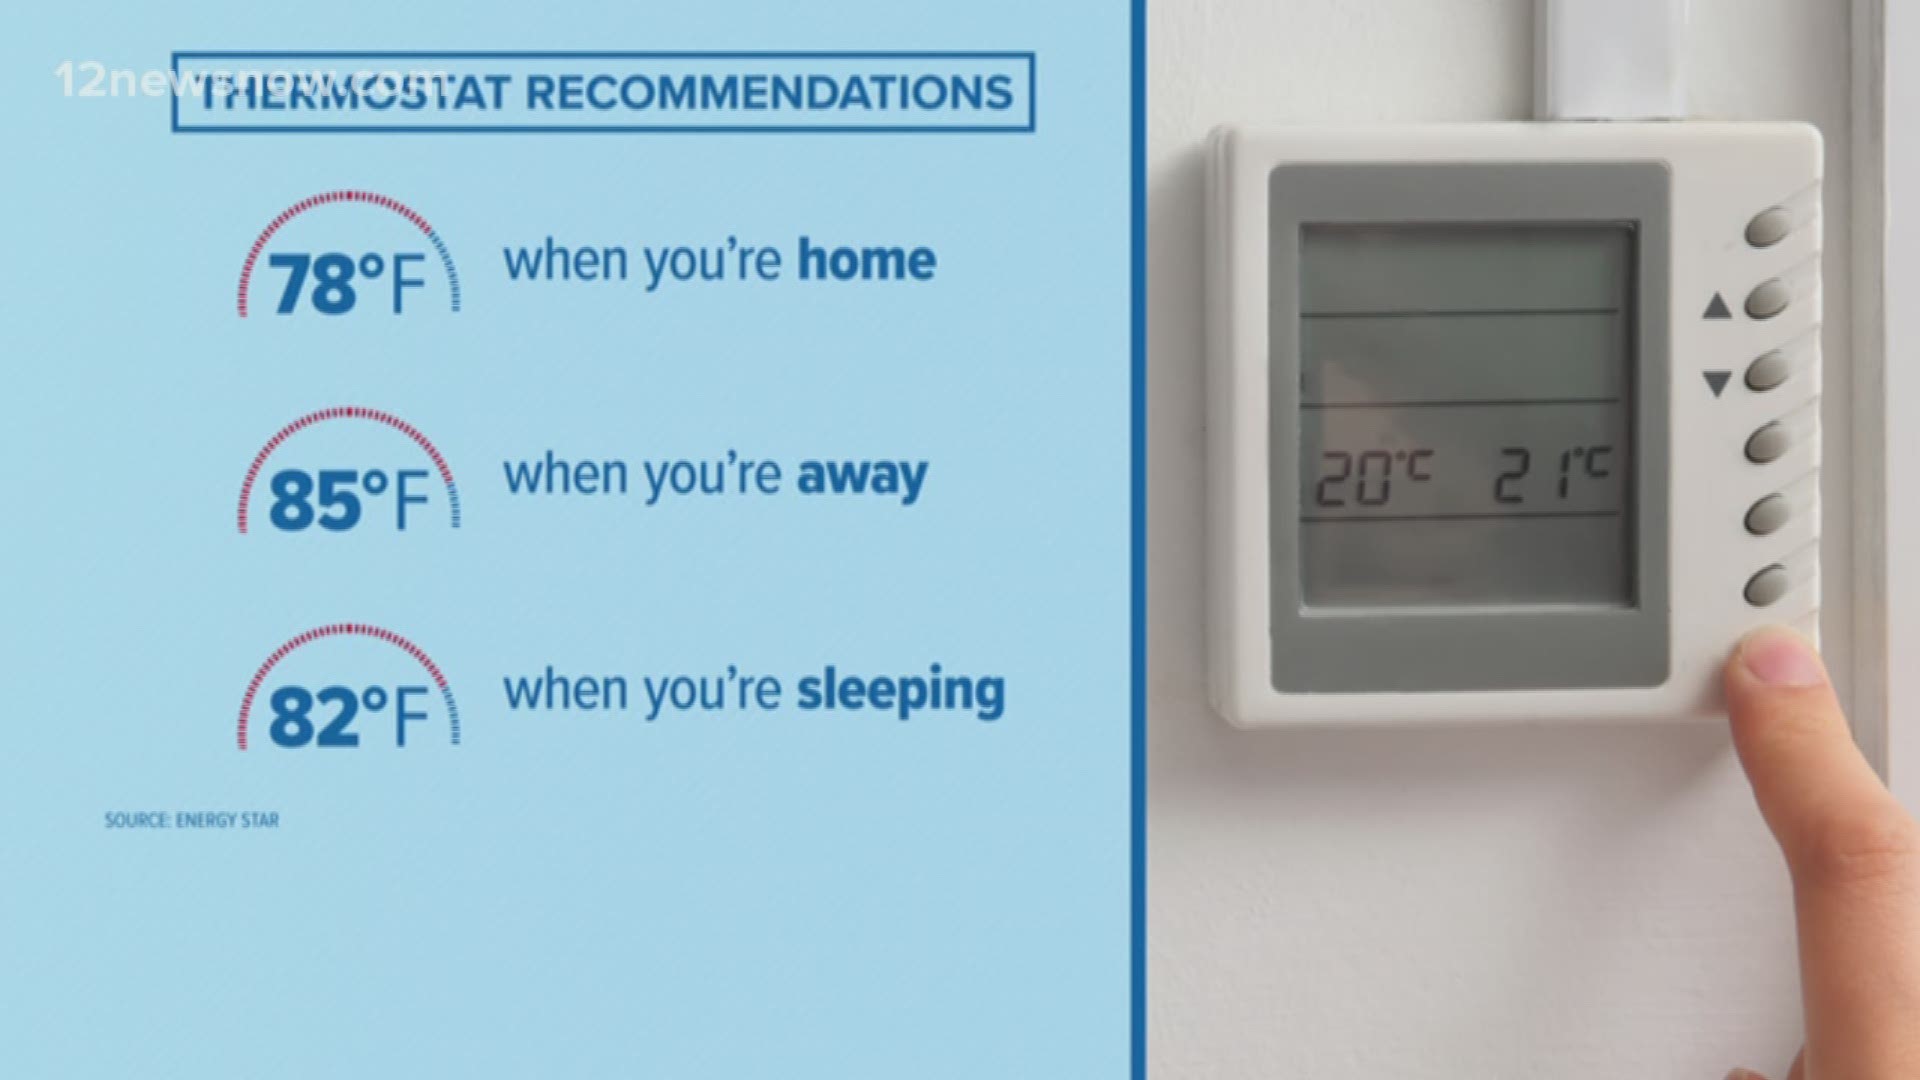 The coolest you should keep your house is 78 degrees, federal program recommends